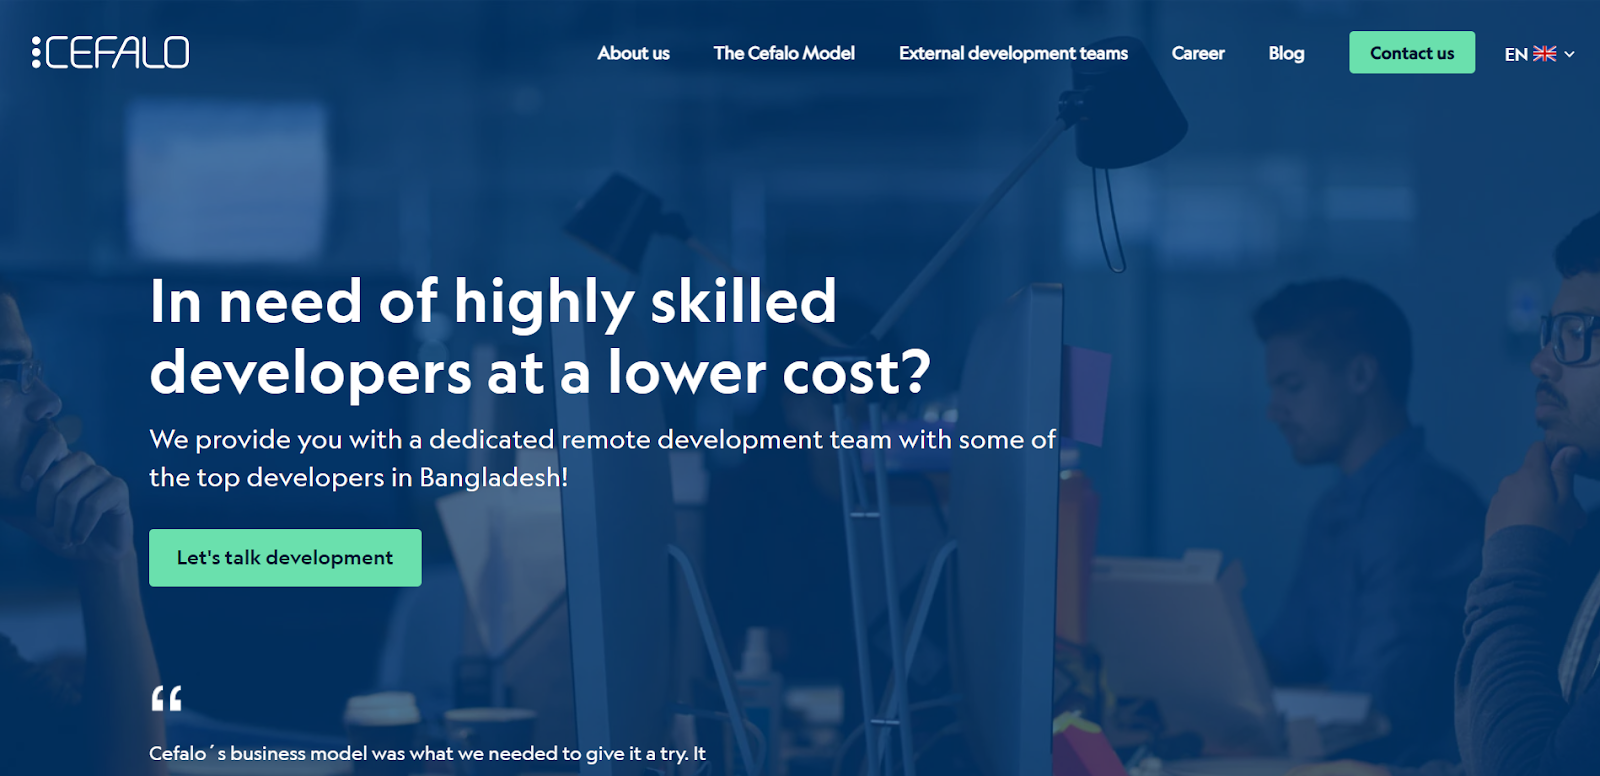 Cafelo is an excellent software company in Bangladesh